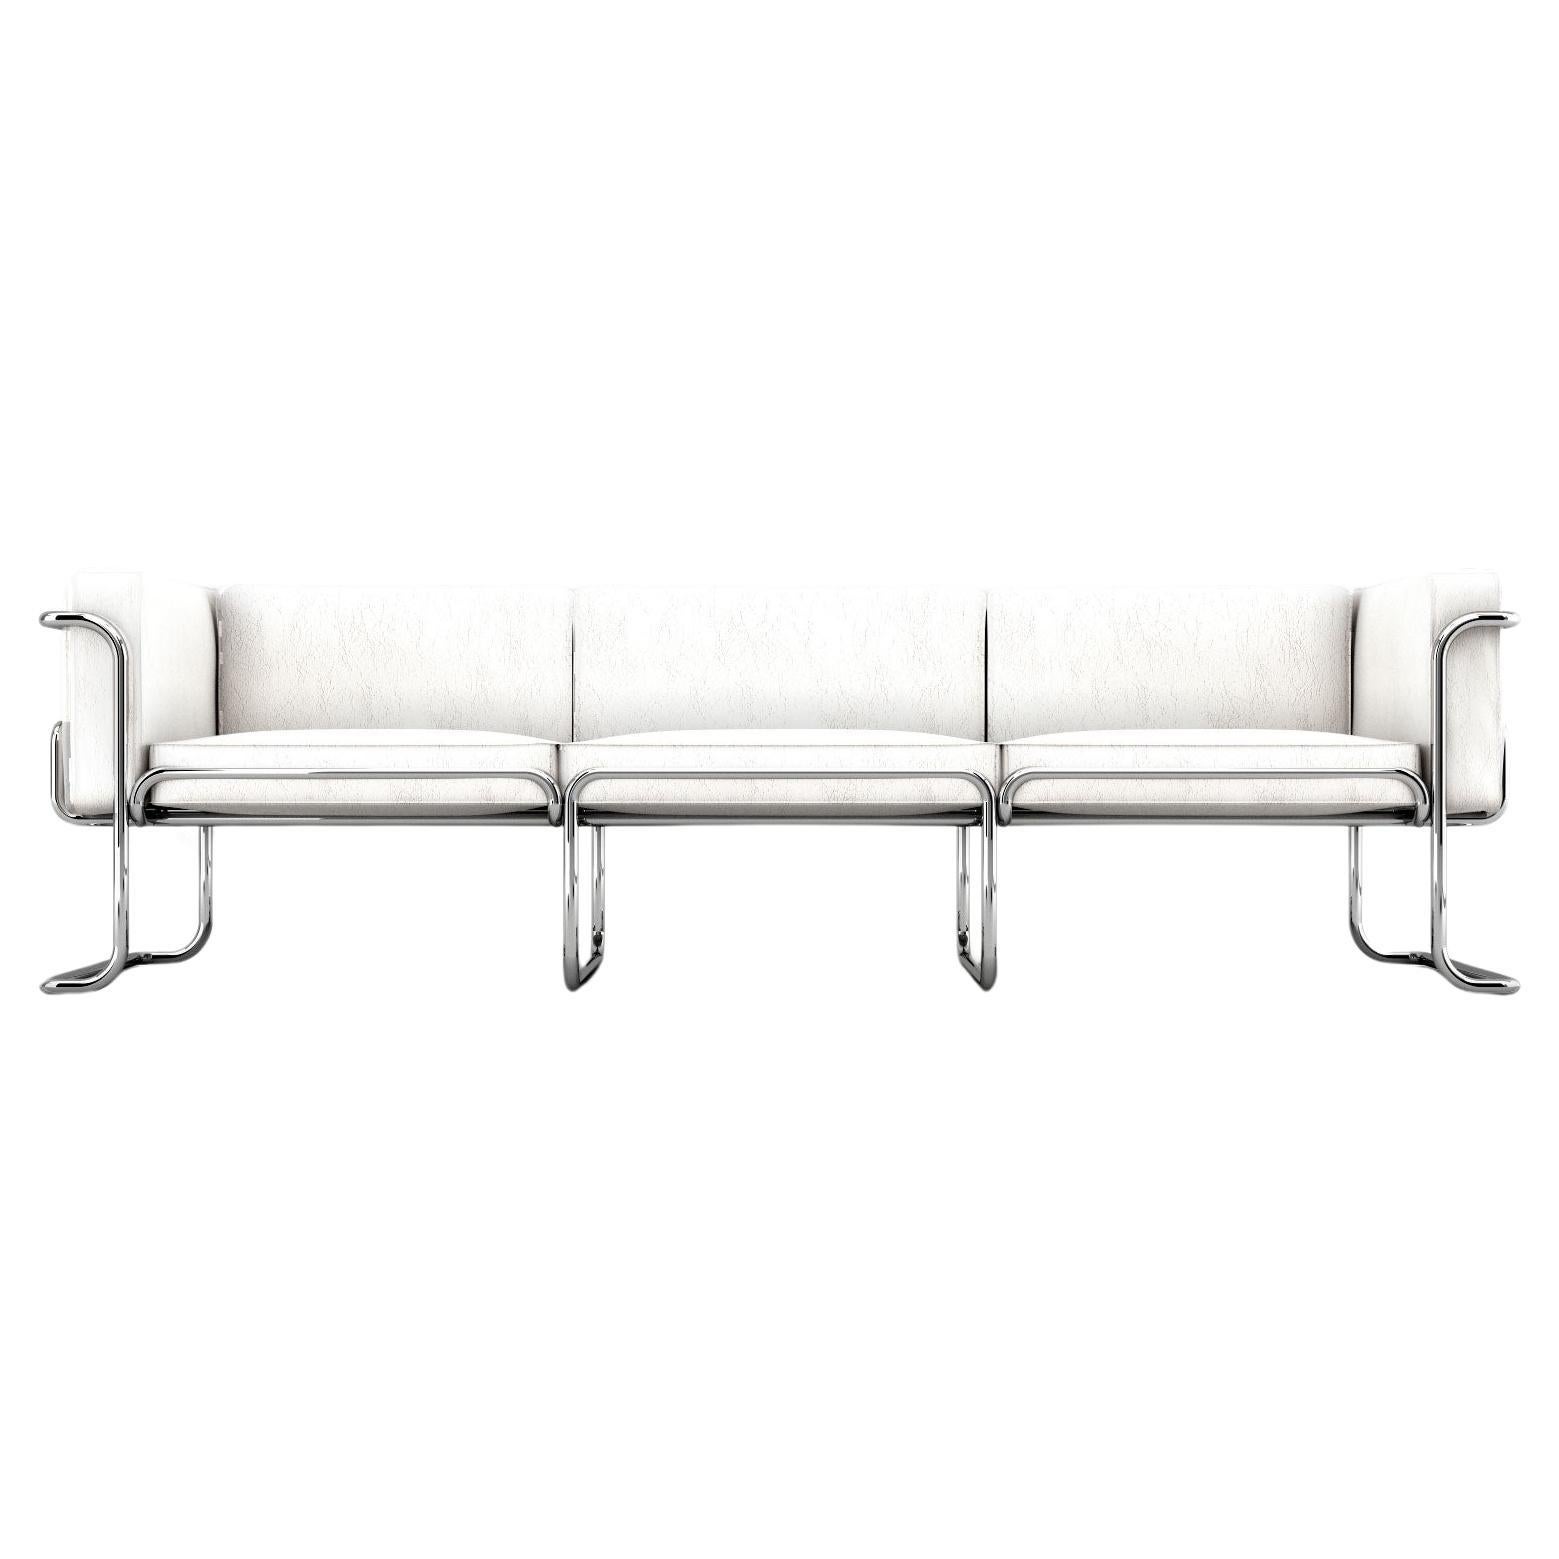 Lotus 3 Seat Sofa - Modern White Leather Sofa with Stainless Steel Legs For Sale